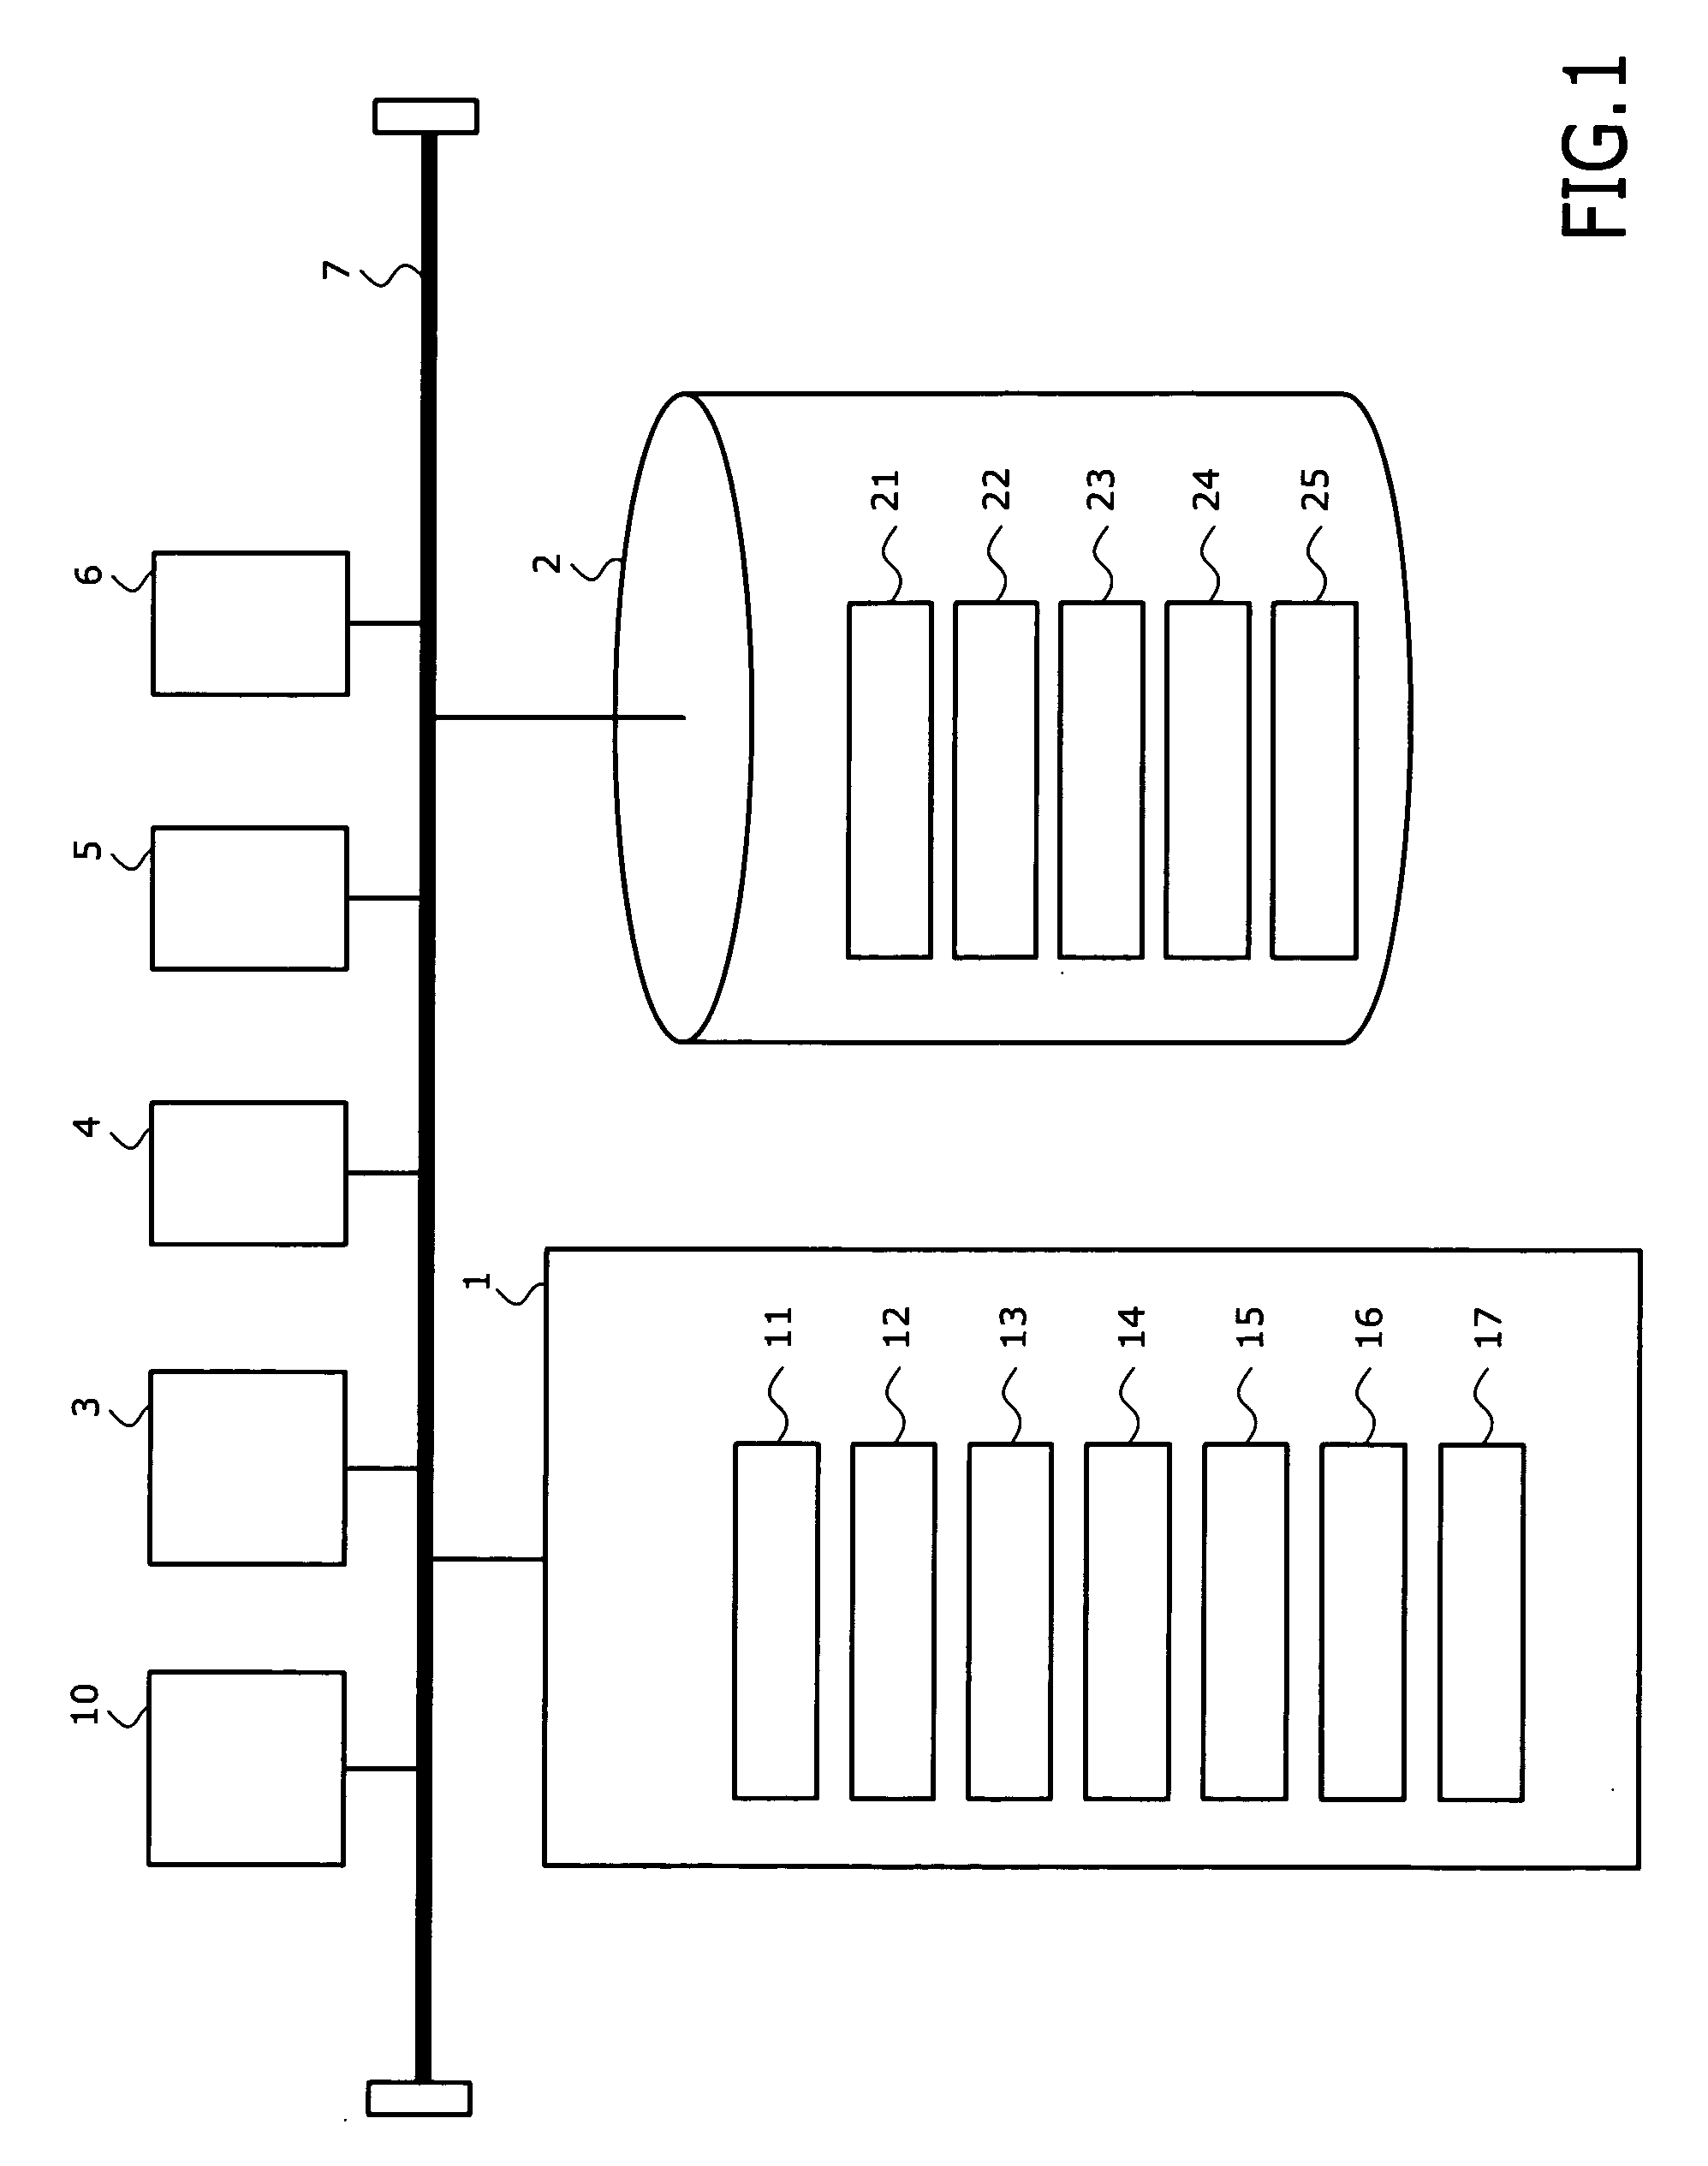 Quality control system, quality control method, and method of lot-to-lot wafer processing